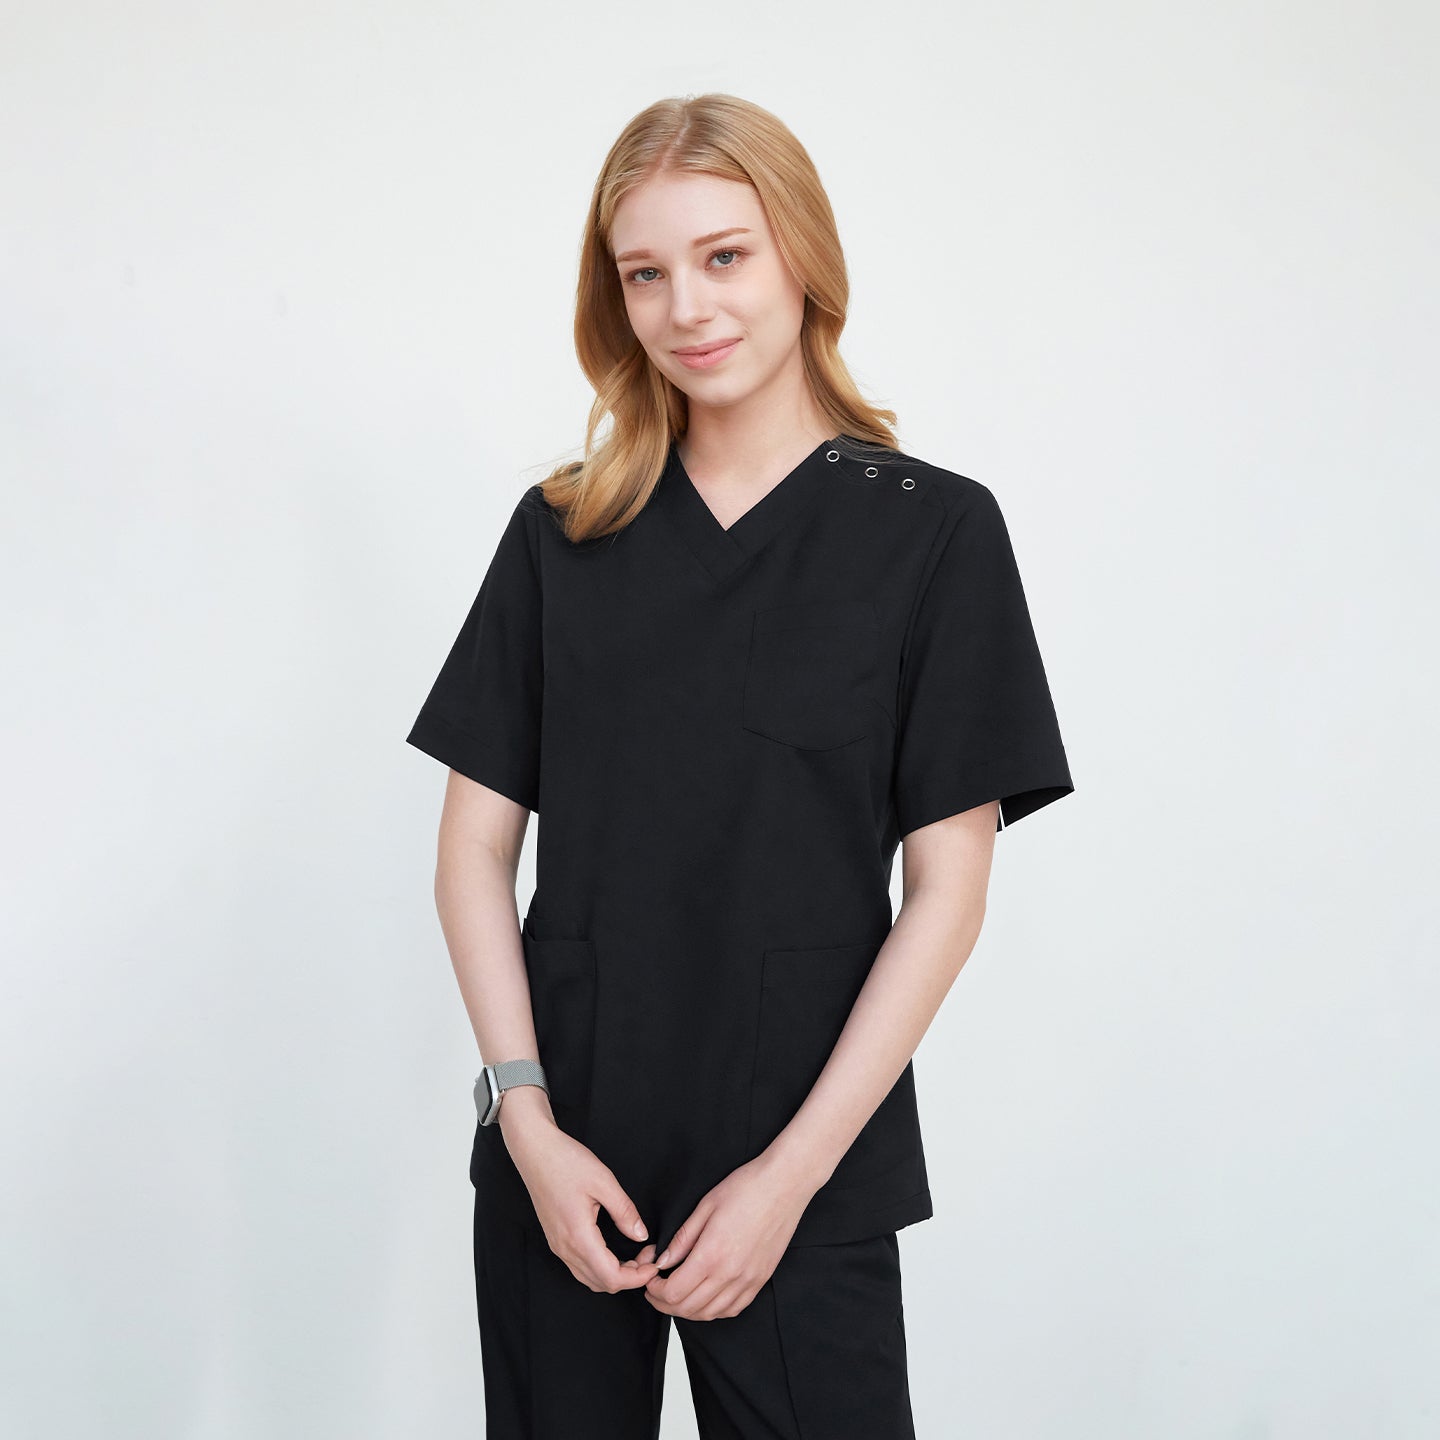 A woman wearing a black scrub top with buttons on the shoulder, standing against a plain background,Black